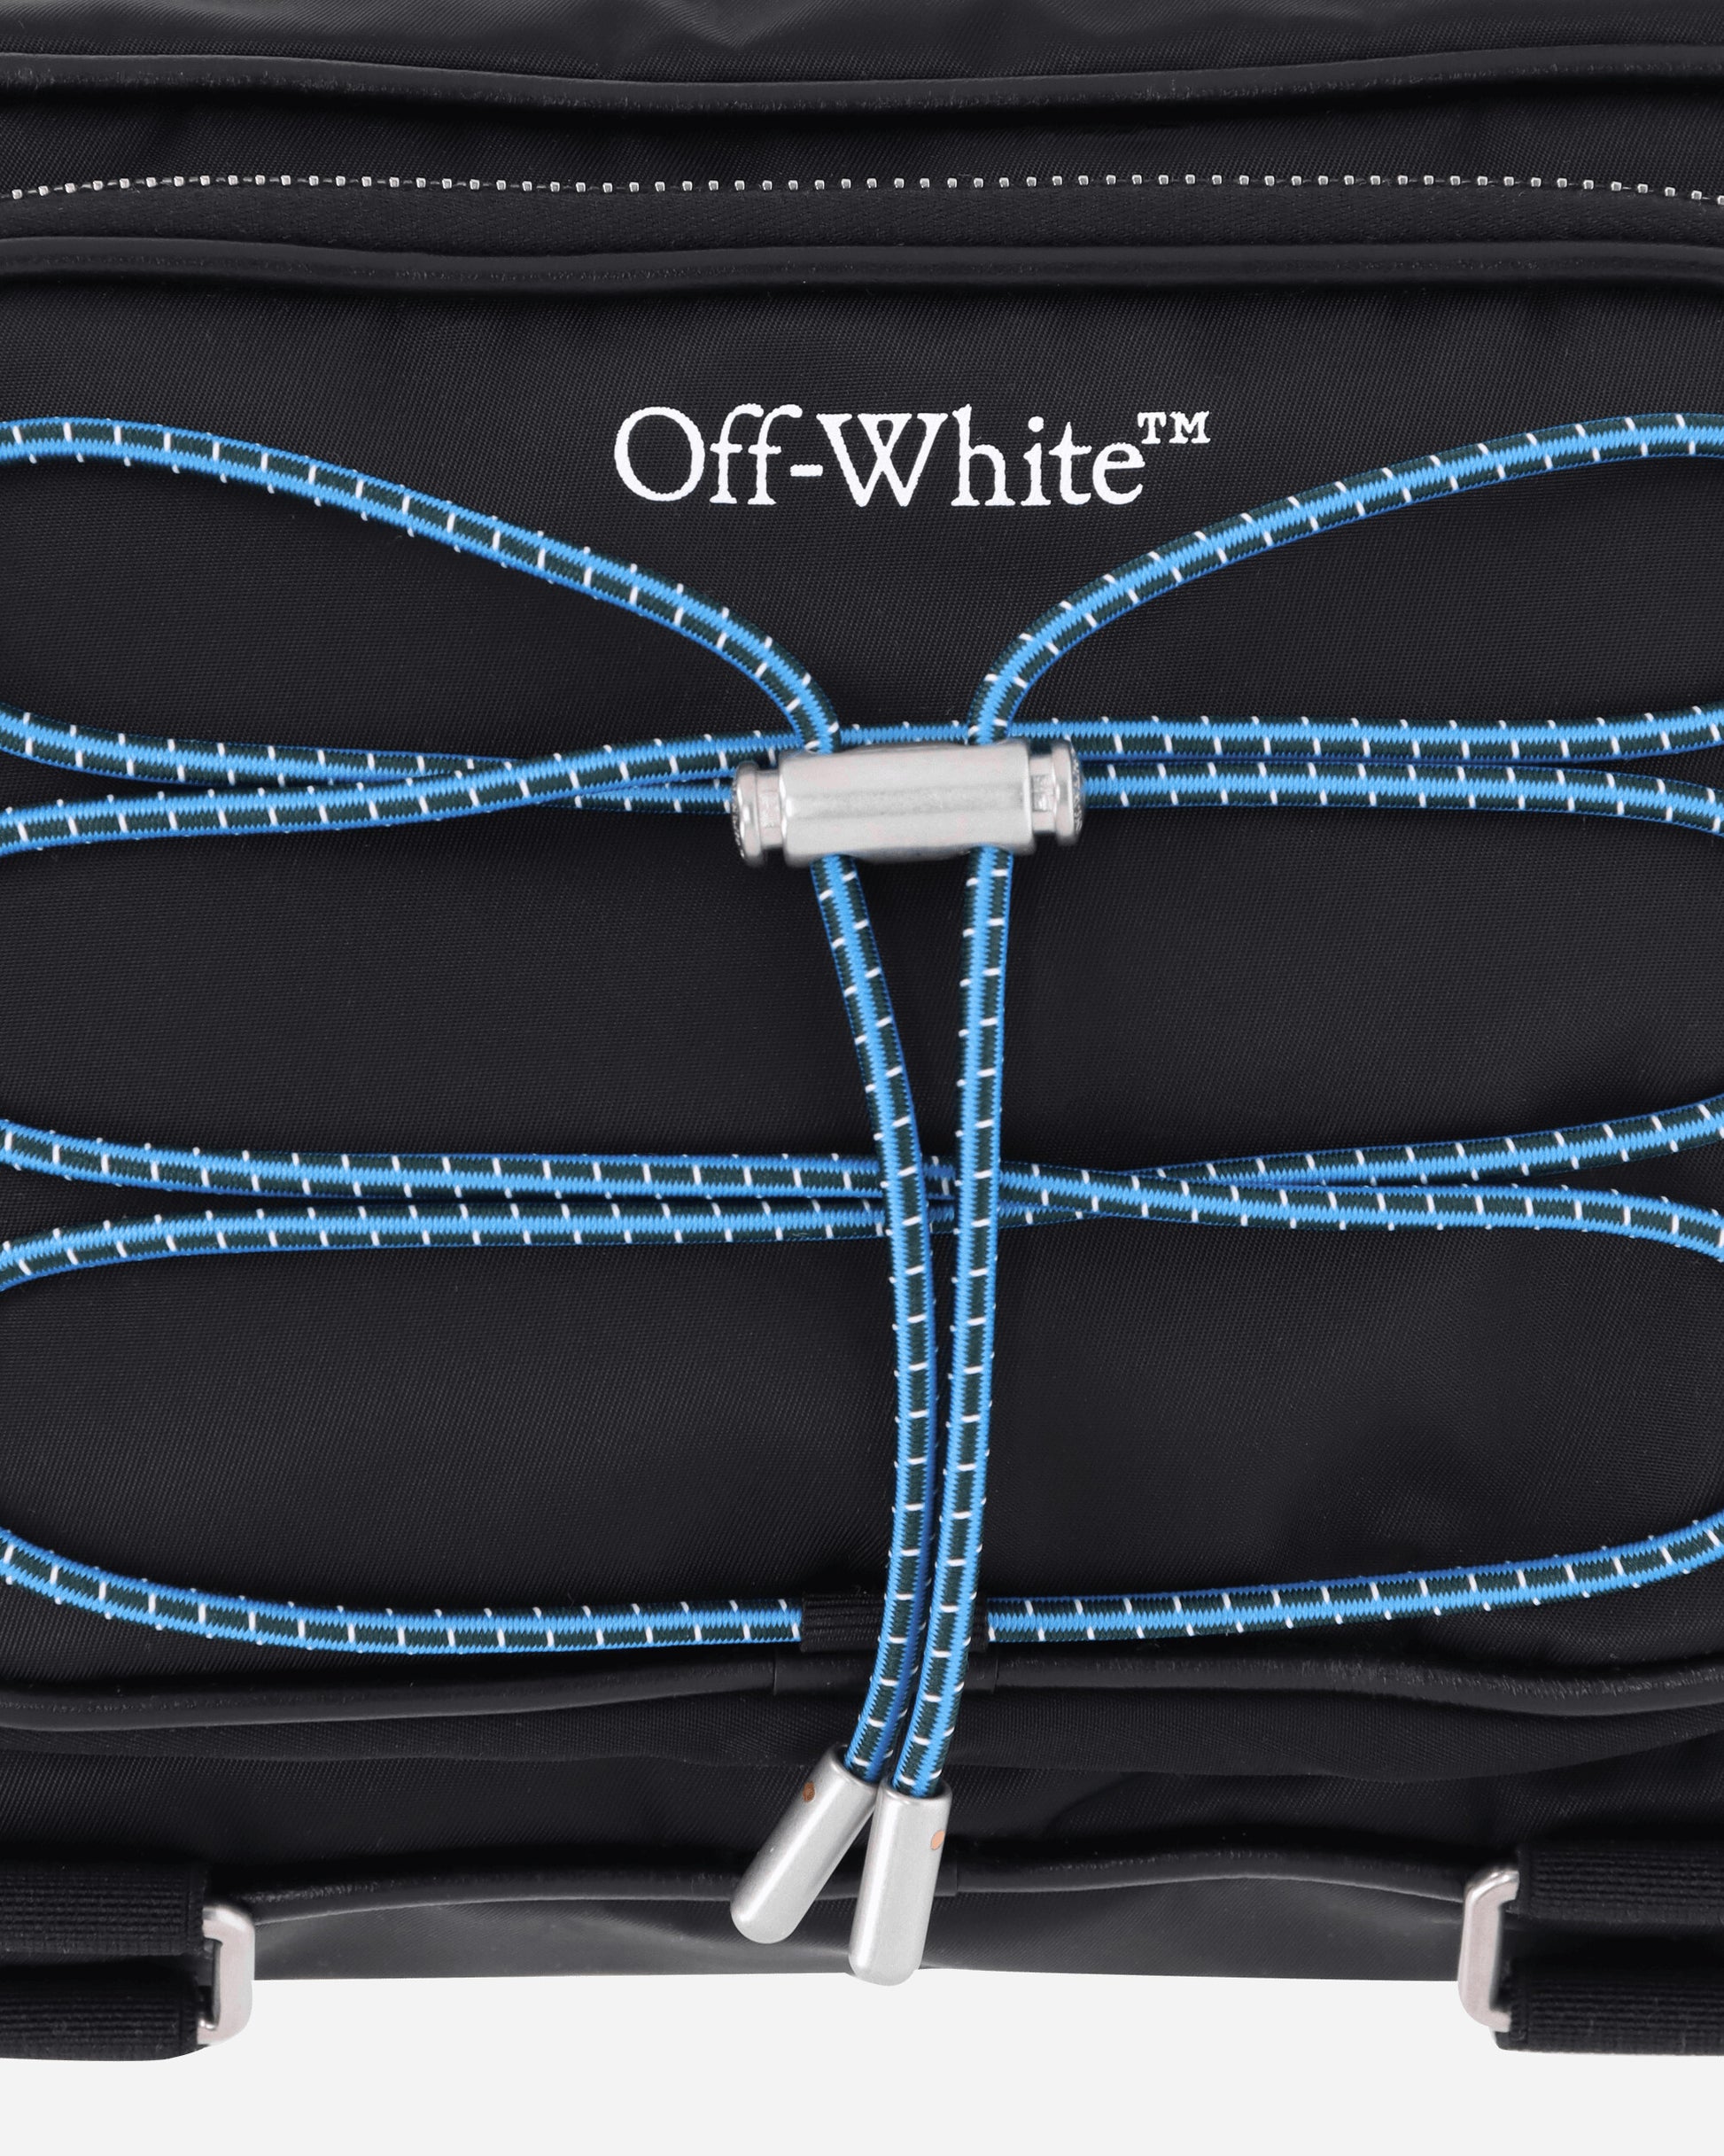 Off-White Courrier Camera Black/Multicolor Bags and Backpacks Shoulder Bags OMNQ070F23FAB001 1000